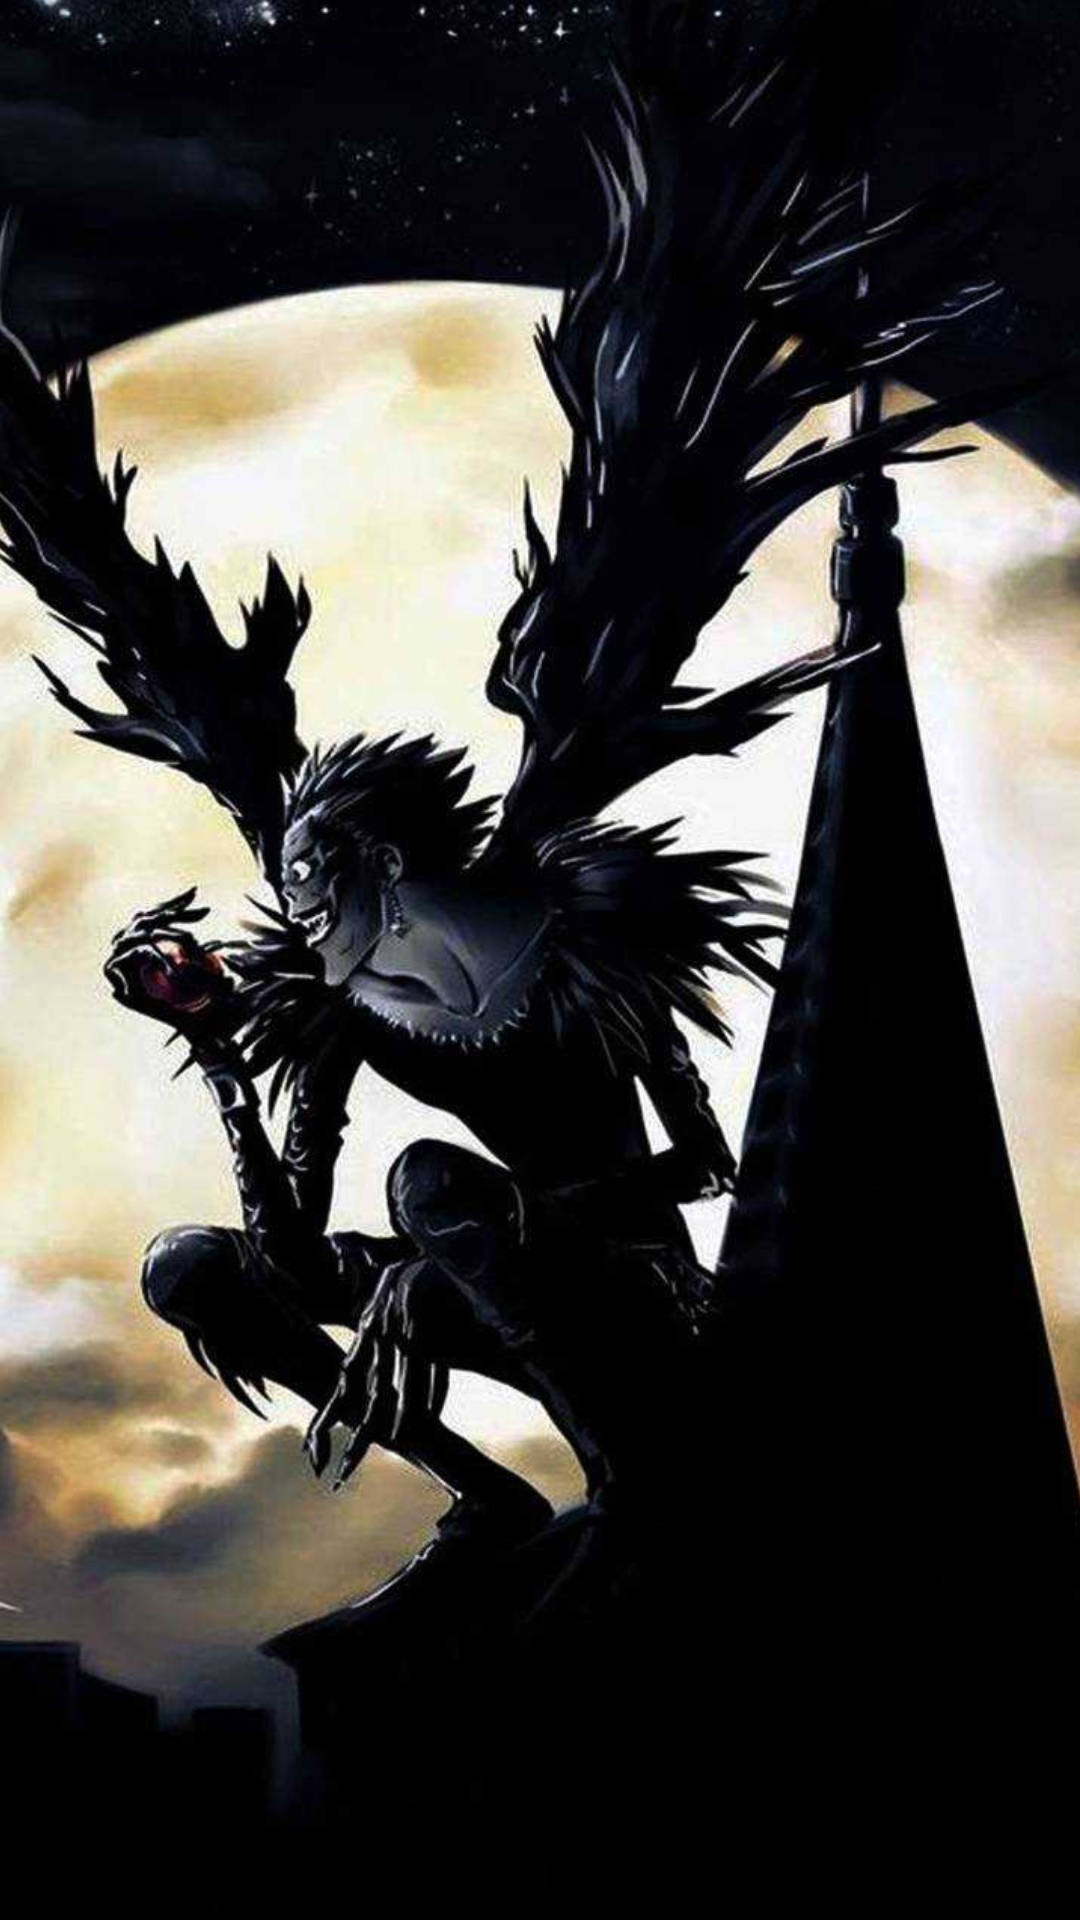 Full Moon And Ryuk From Death Note iPhone Wallpaper